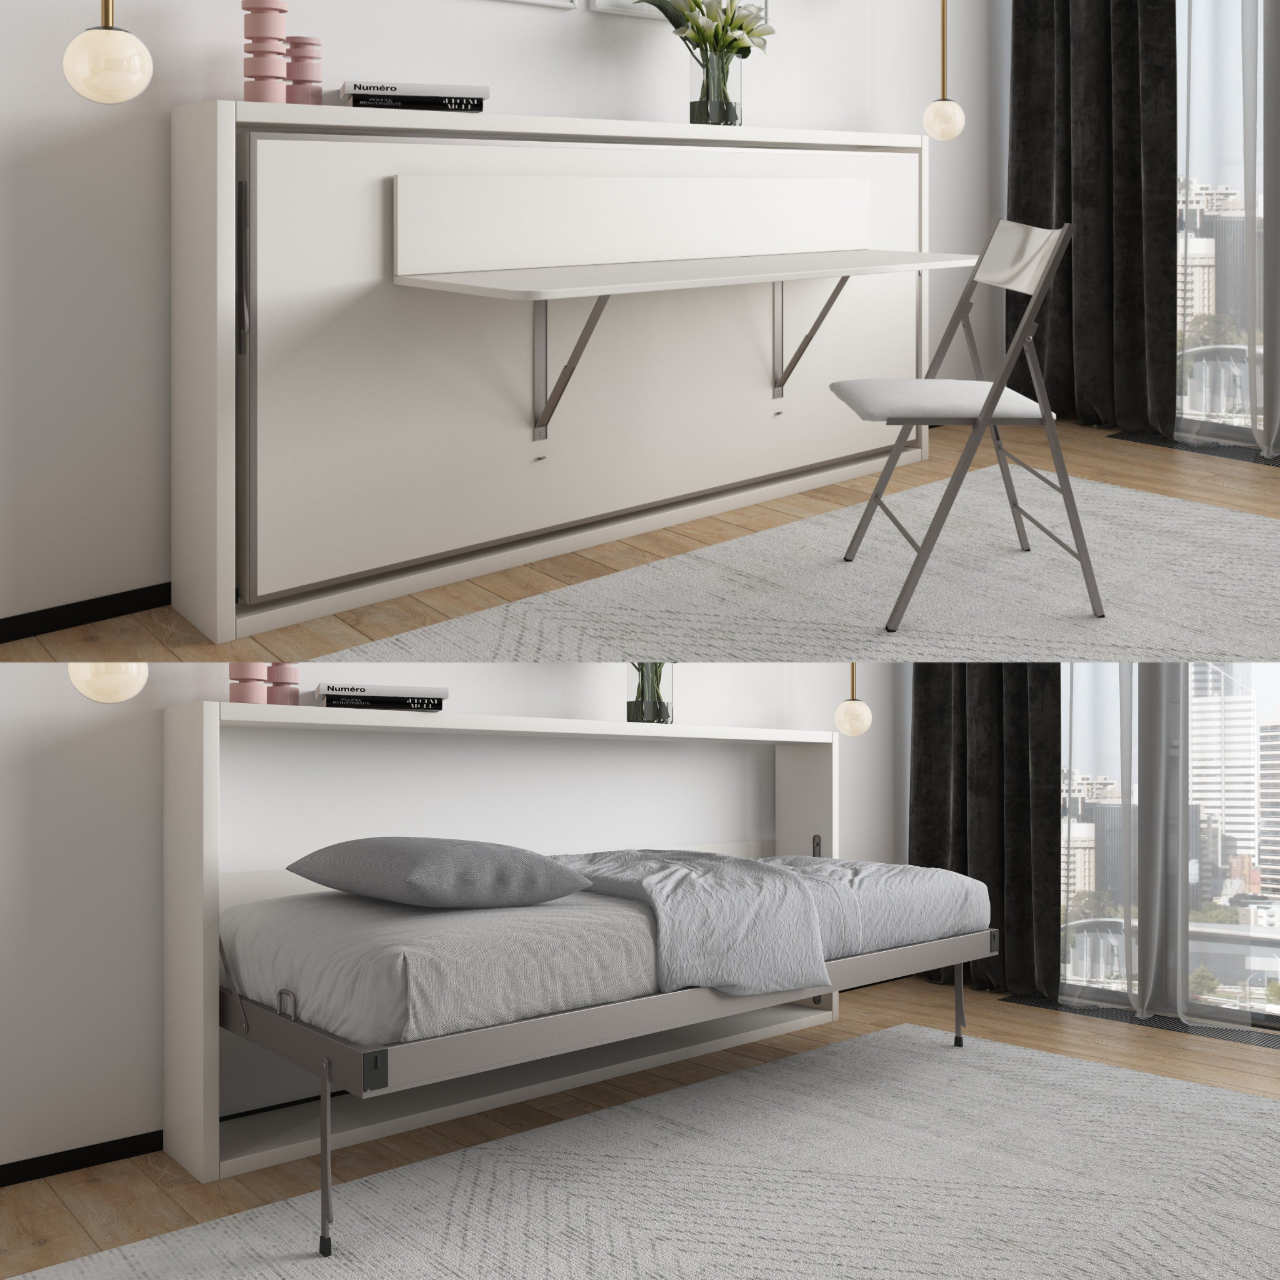 Compatto – Horizontal Twin Bed With Fold Away Desk - Expand Furniture -  Folding Tables, Smarter Wall Beds, Space Savers